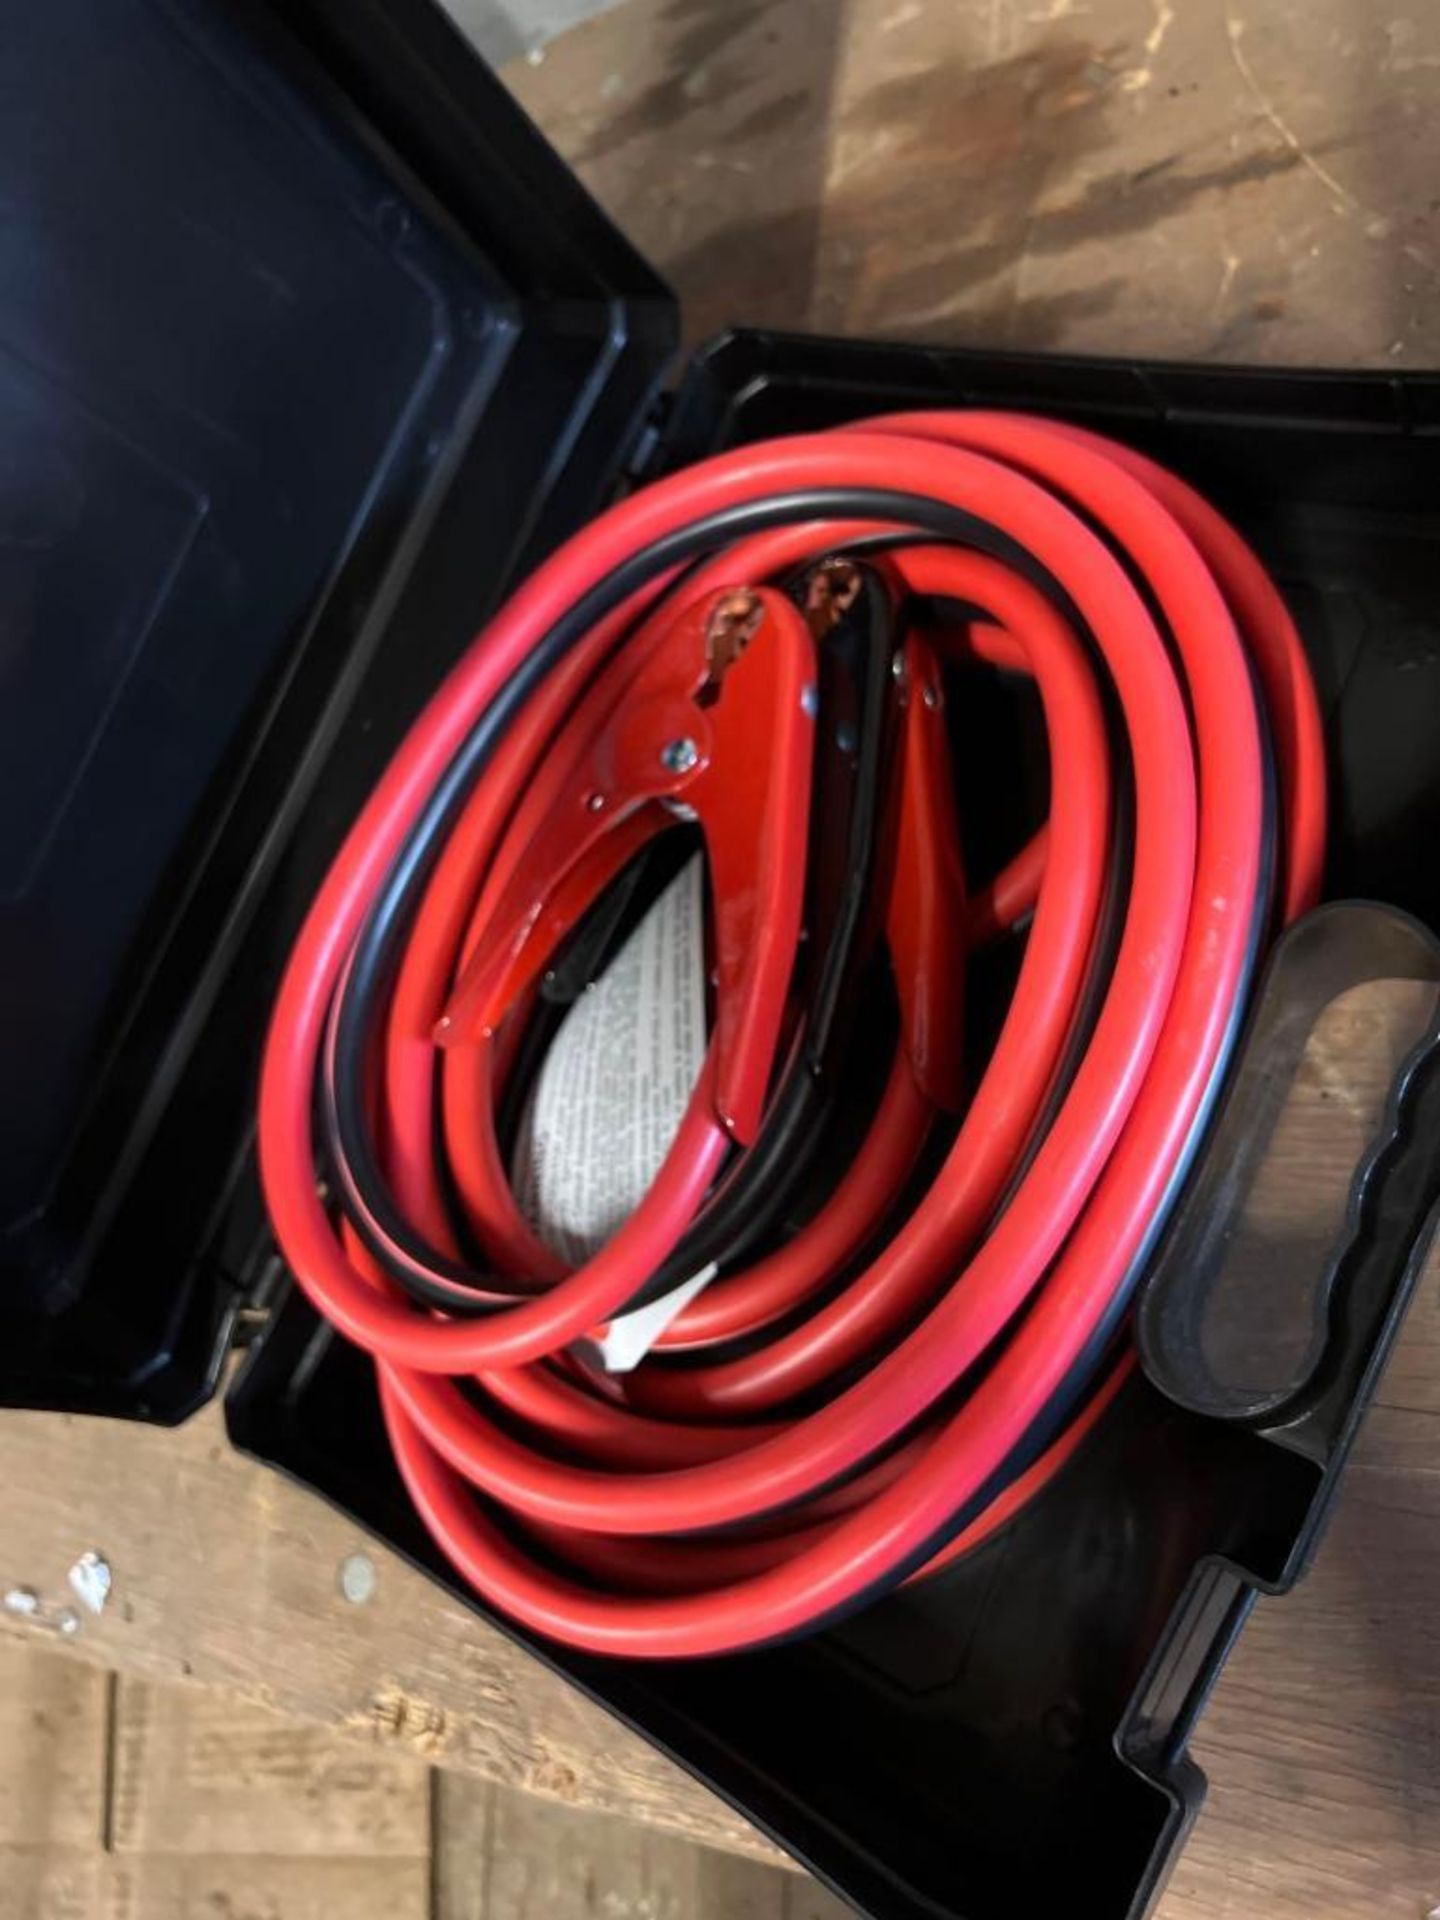 25 Ft. Jumper Cables - Image 2 of 2